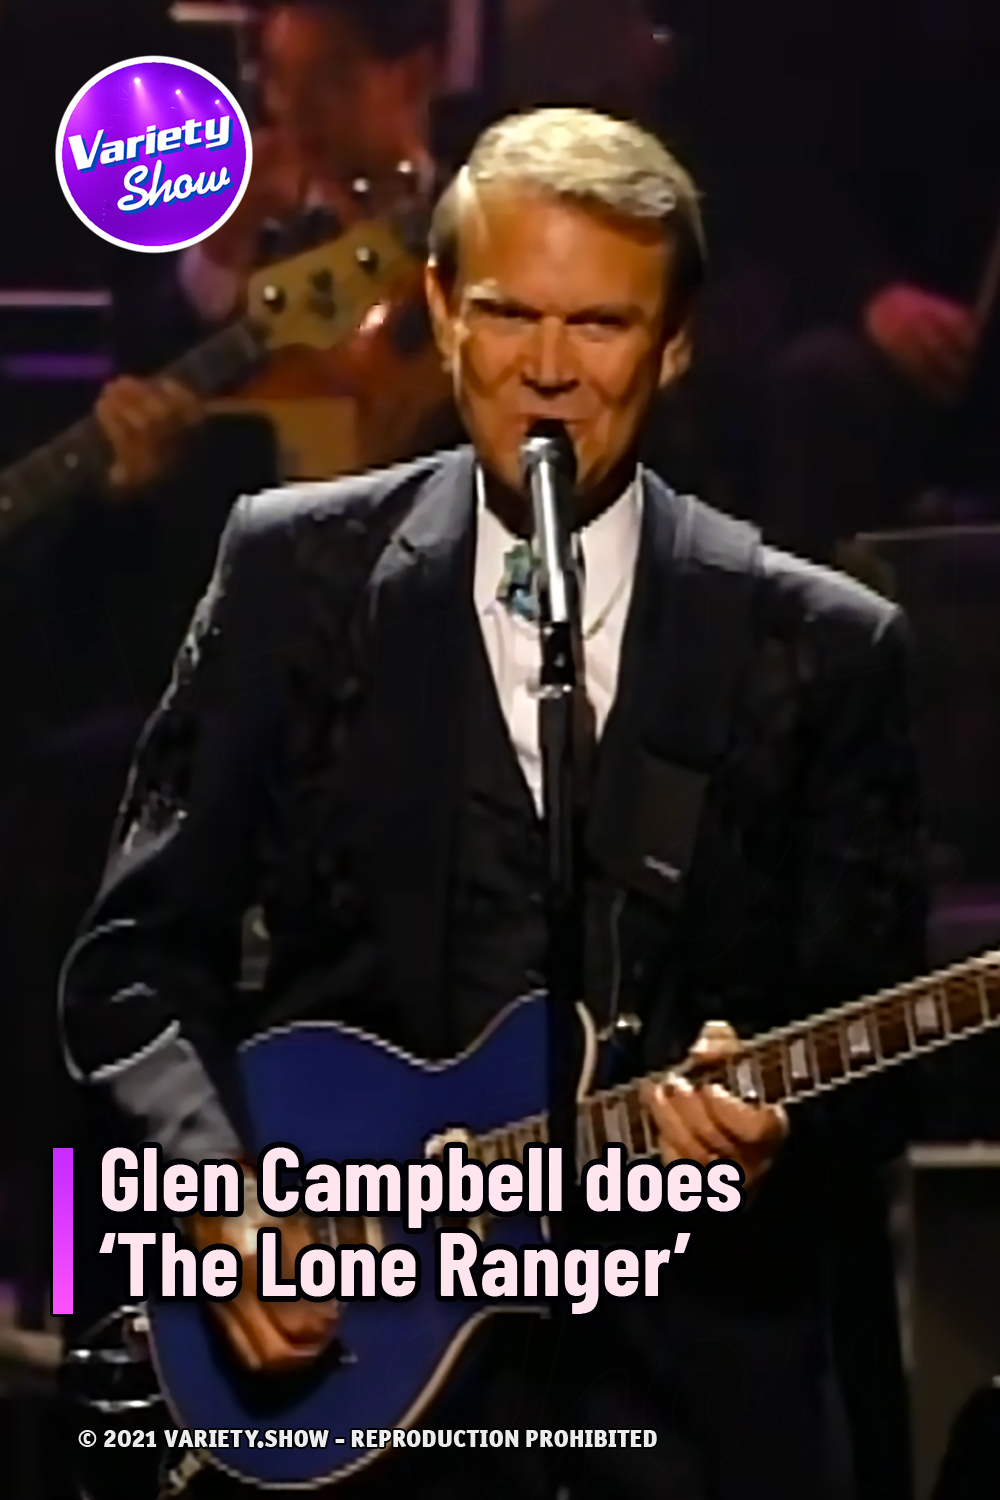 Glen Campbell does ‘The Lone Ranger’